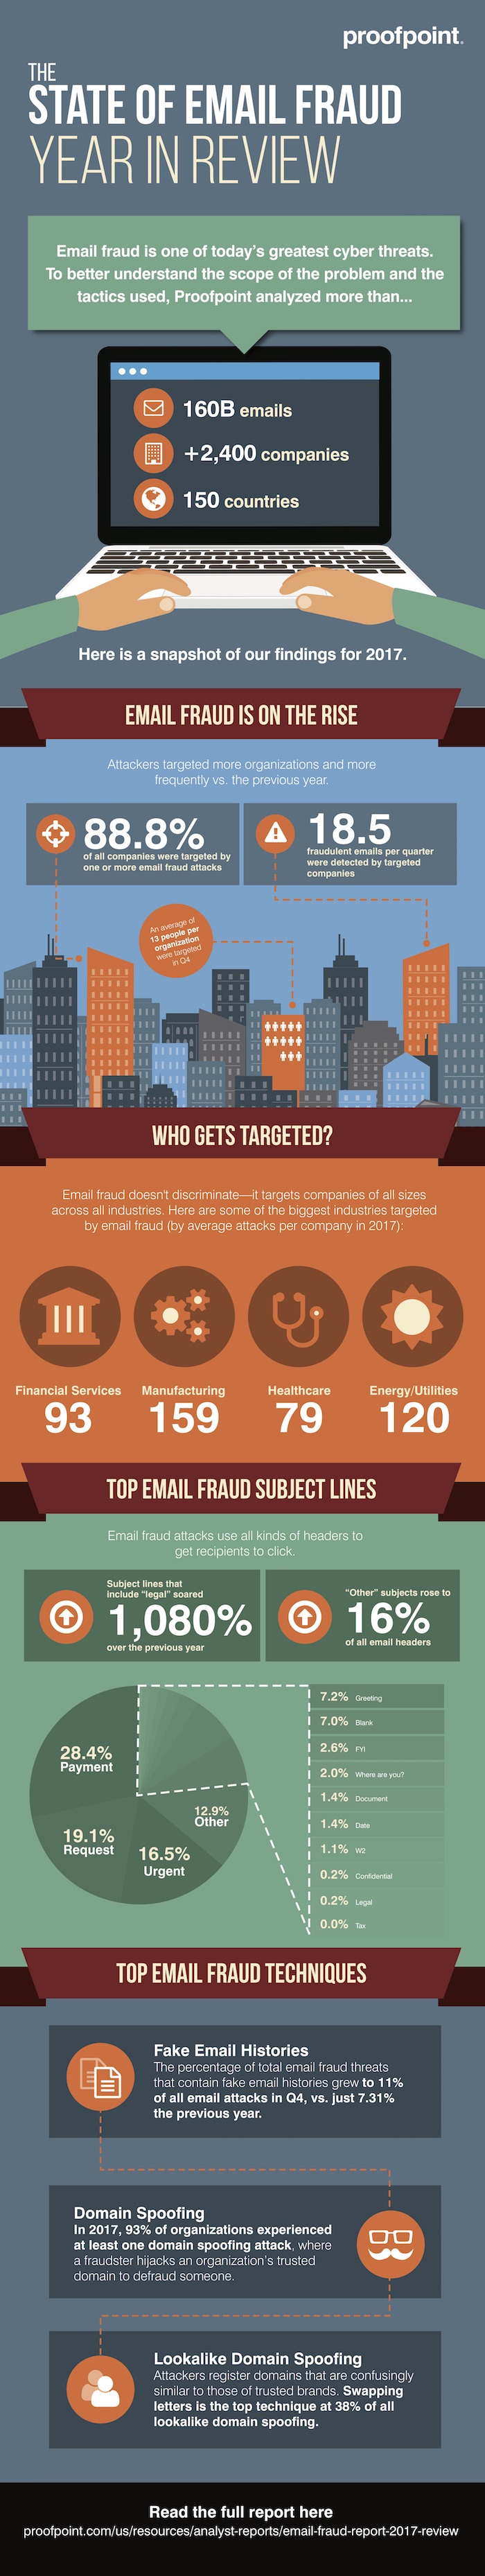 pfpt-us-ig-email-fraud-review-180212